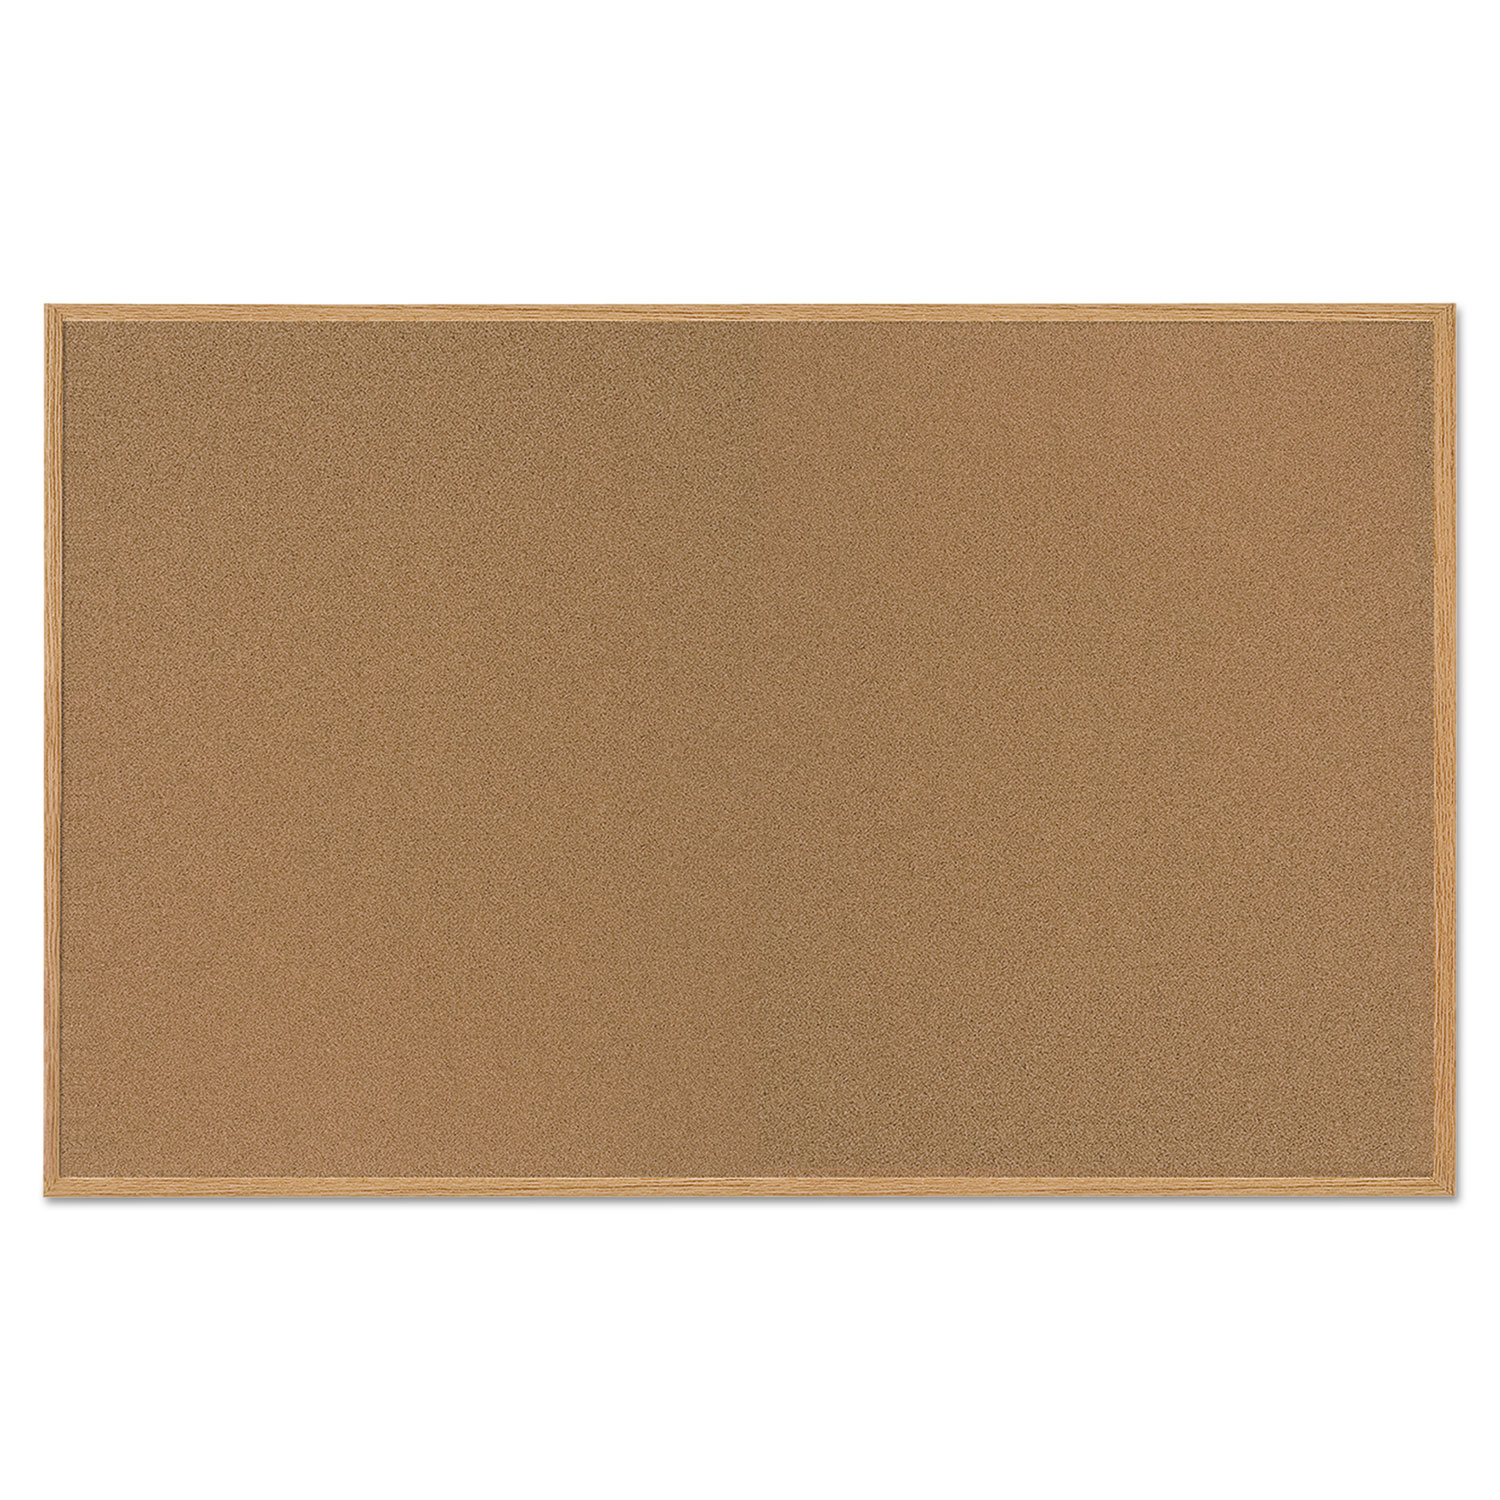  MasterVision SF352001239 Value Cork Bulletin Board with Oak Frame, 48 x 72, Natural (BVCSF352001239) 